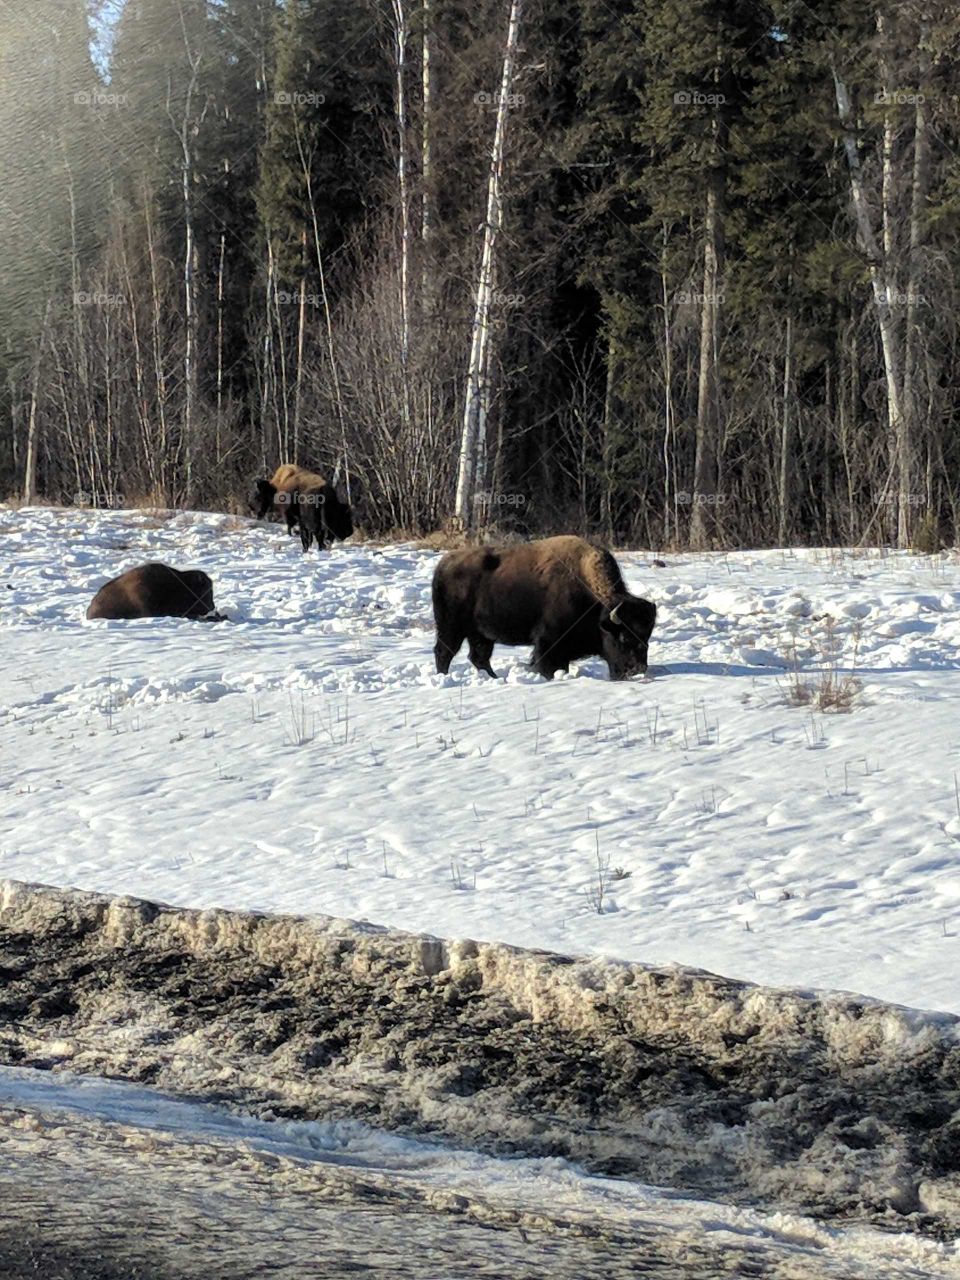 Buffalo on the side on the road in herds bedding down and eating as we drove by through the Yukon